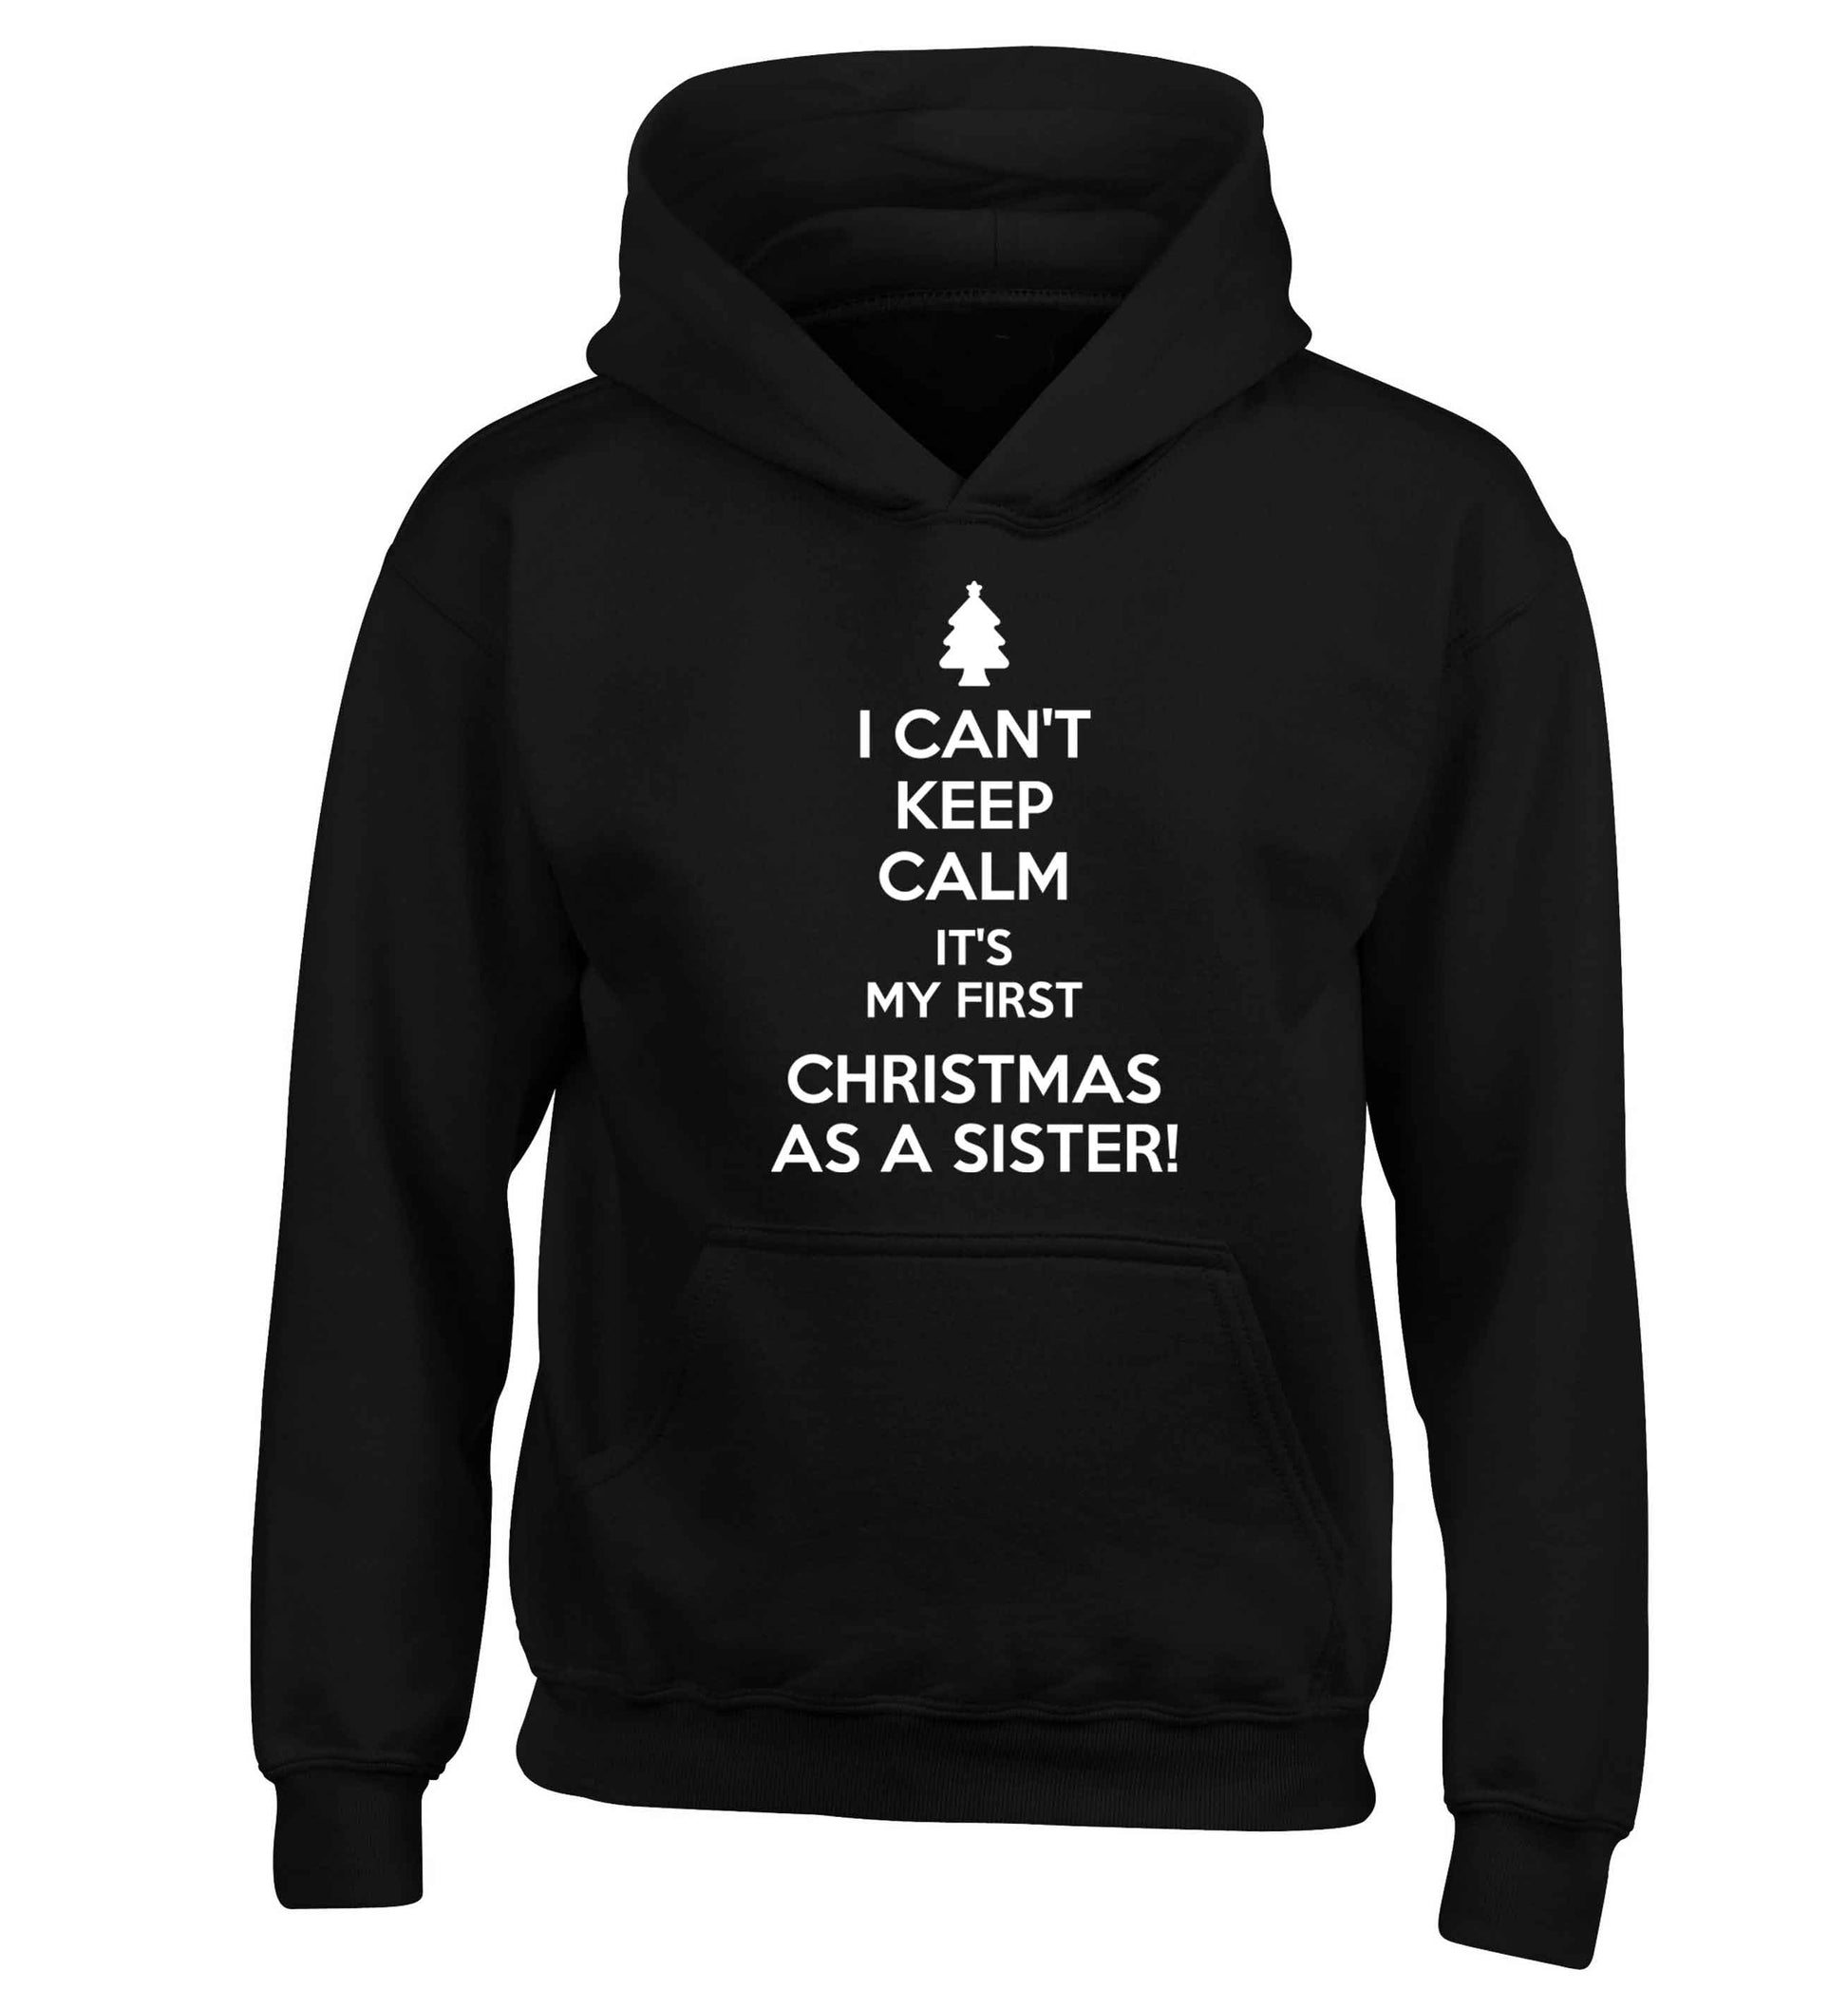 I can't keep calm it's my first Christmas as a sister! children's black hoodie 12-13 Years